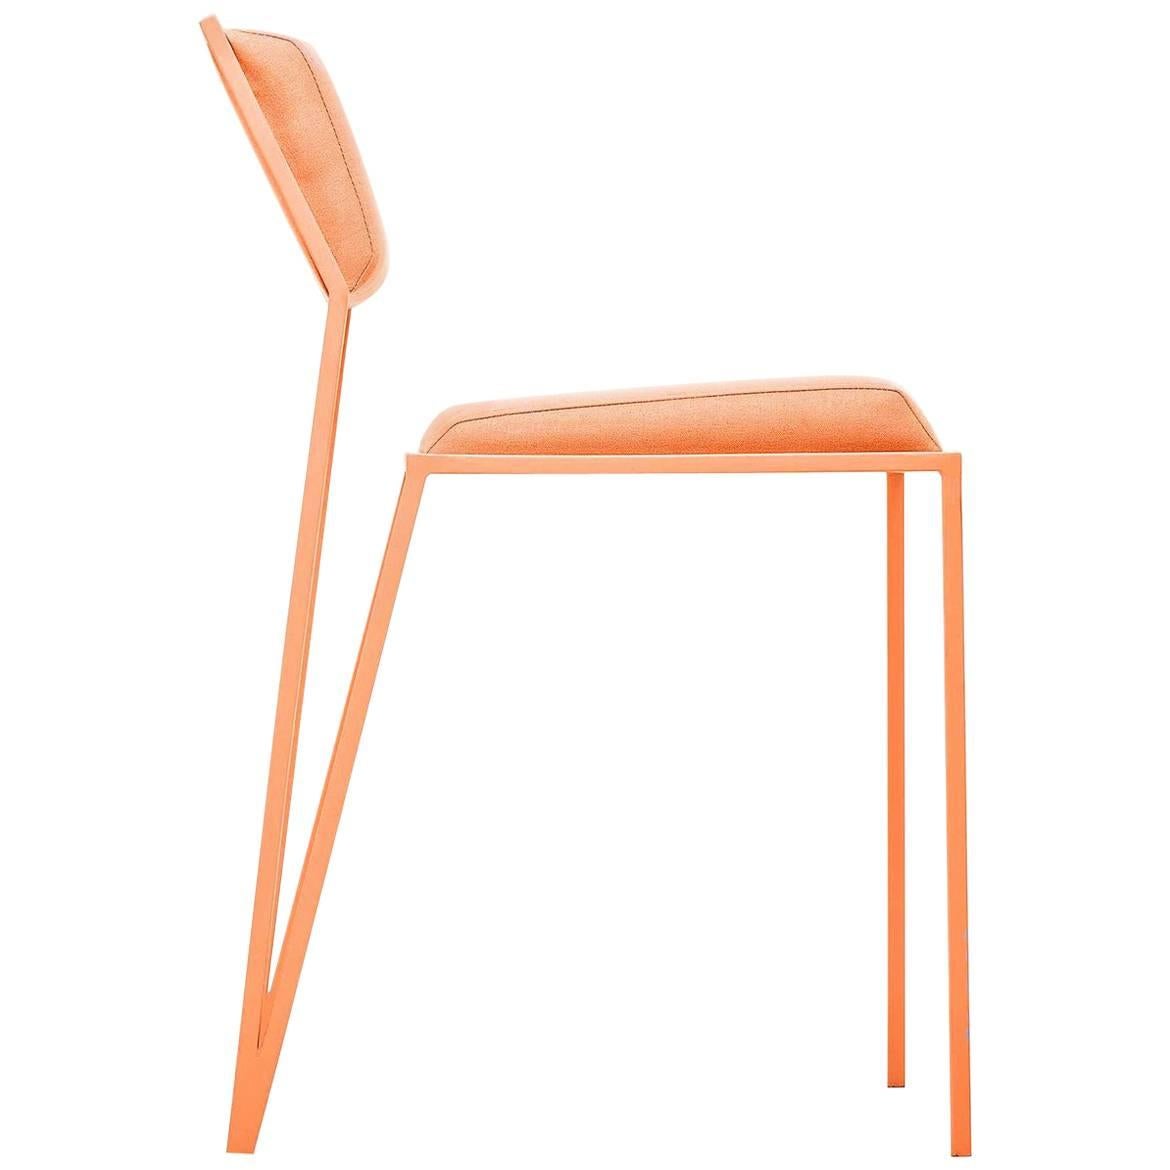 Minimalist Chair in Steel and Smooth Linen, Brazilian Contemporary Style, Orange